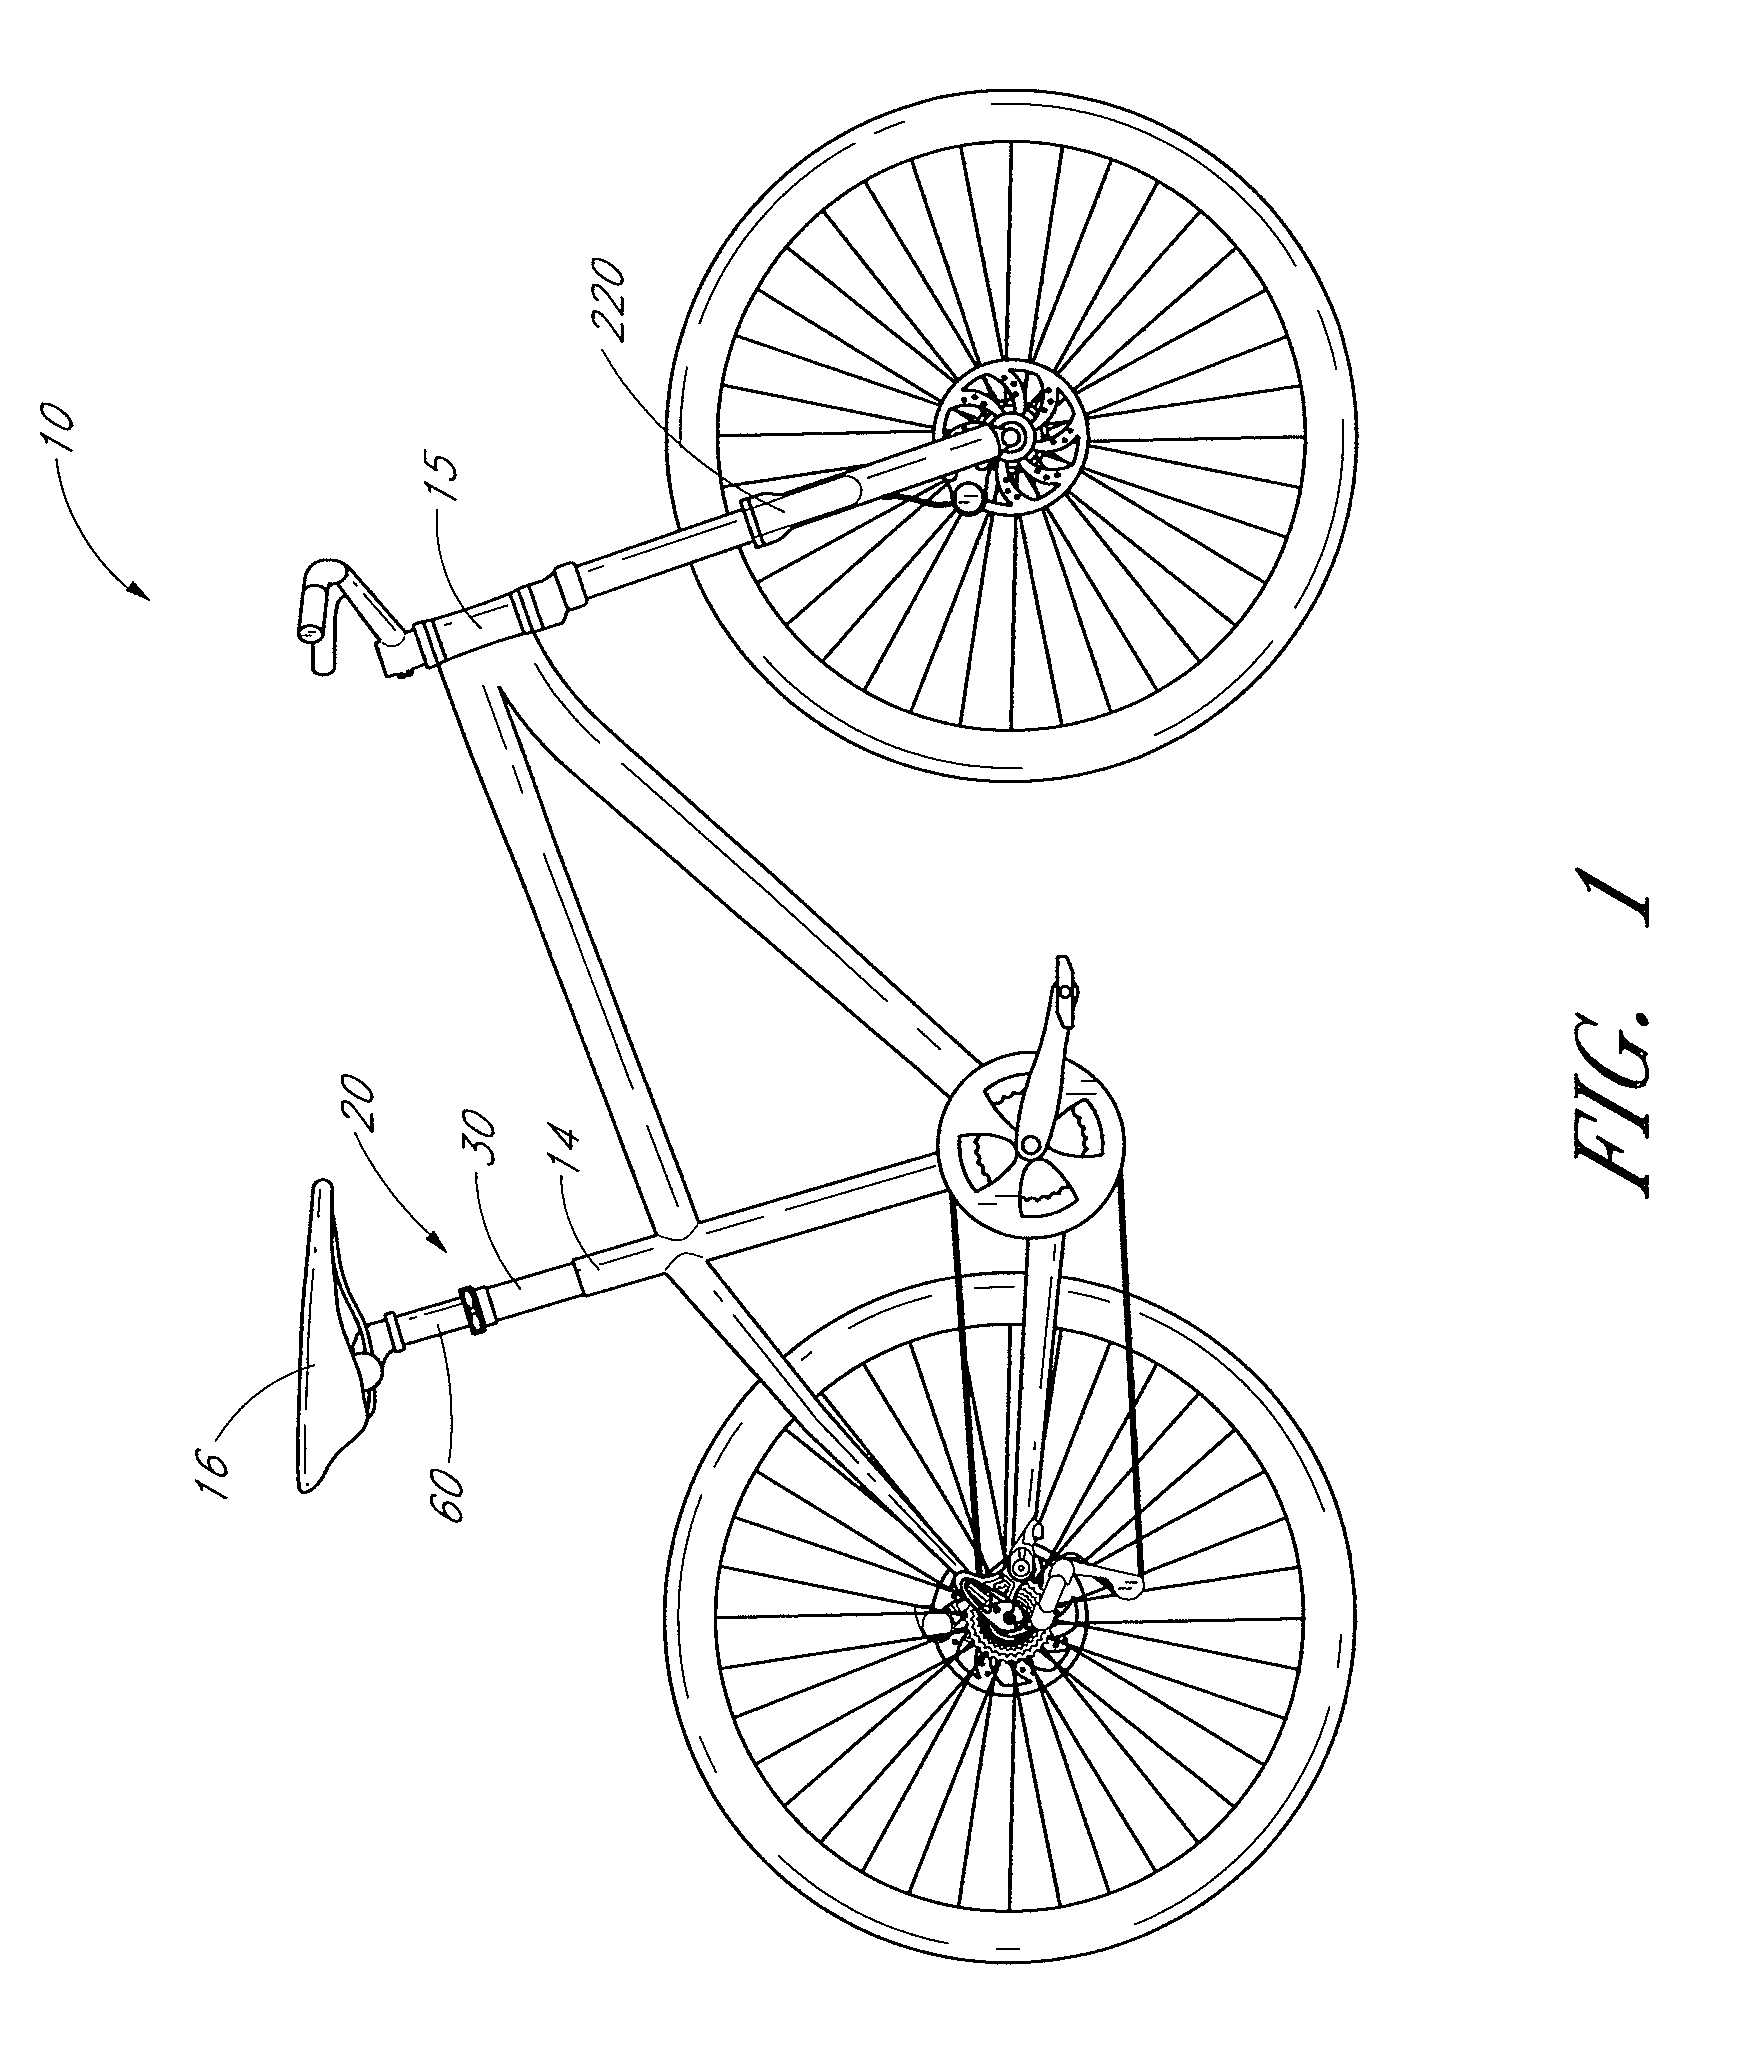 Vertically adjustable bicycle assembly